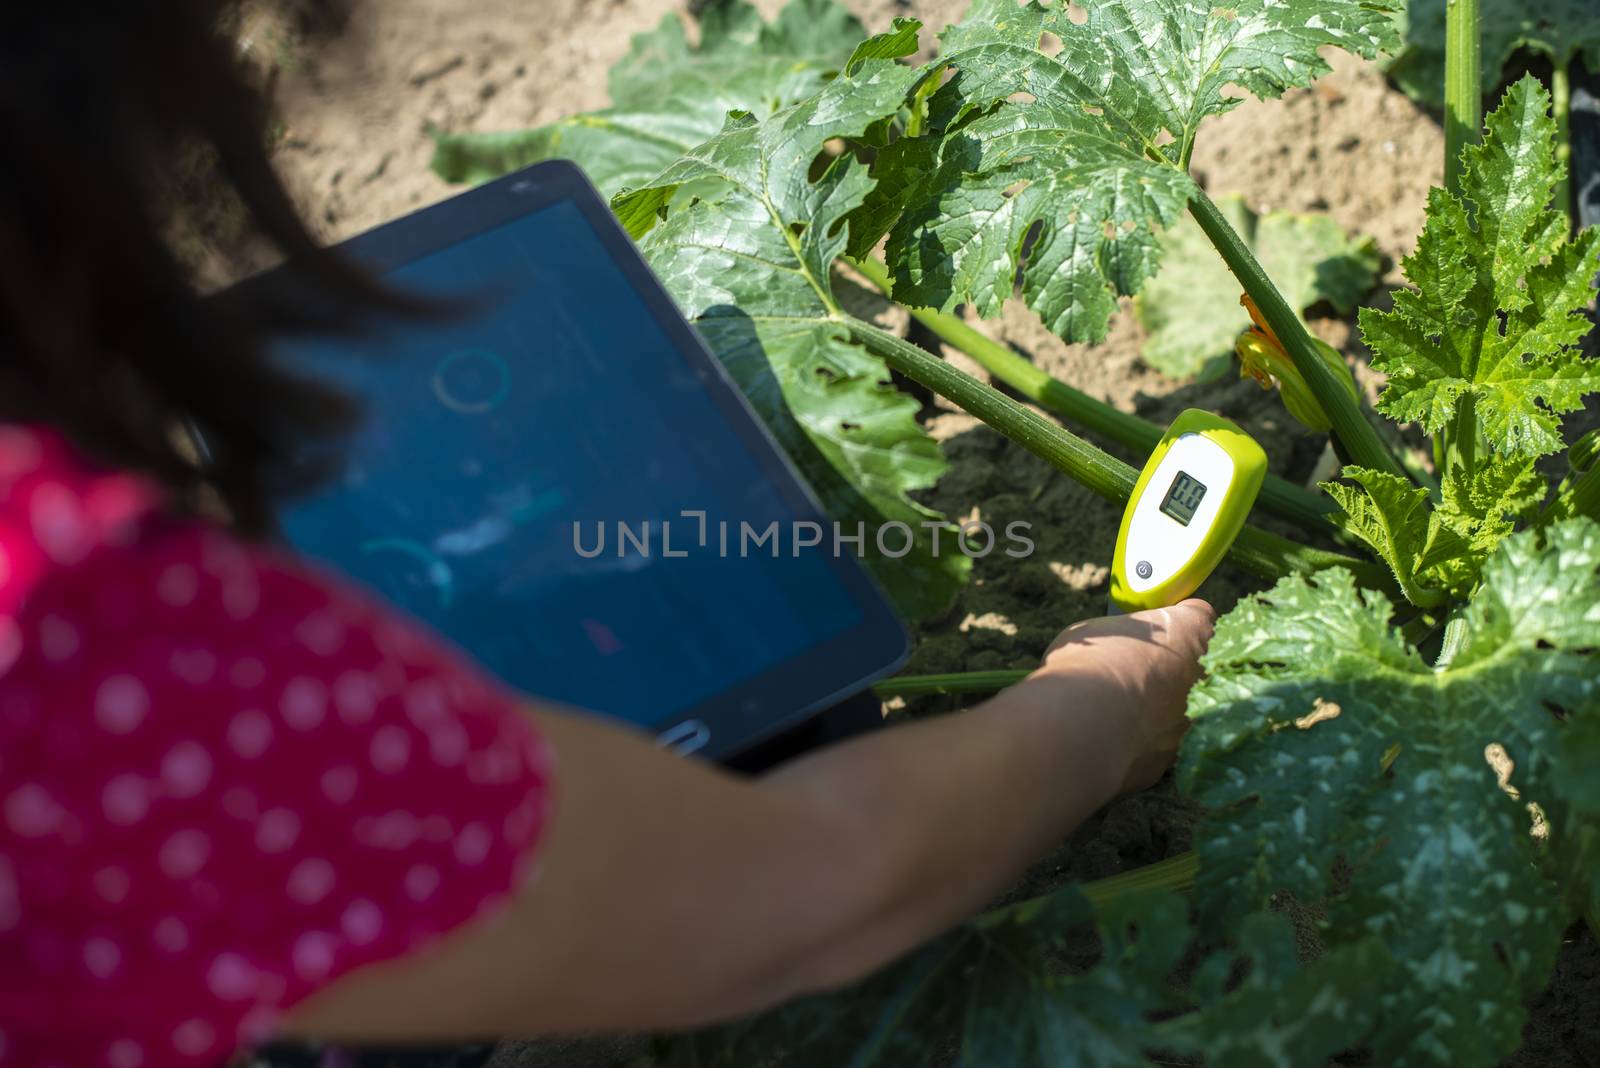 Farmer measure soil in Zucchini plantation. Soil measure device and tablet. New technology in agriculture concept.